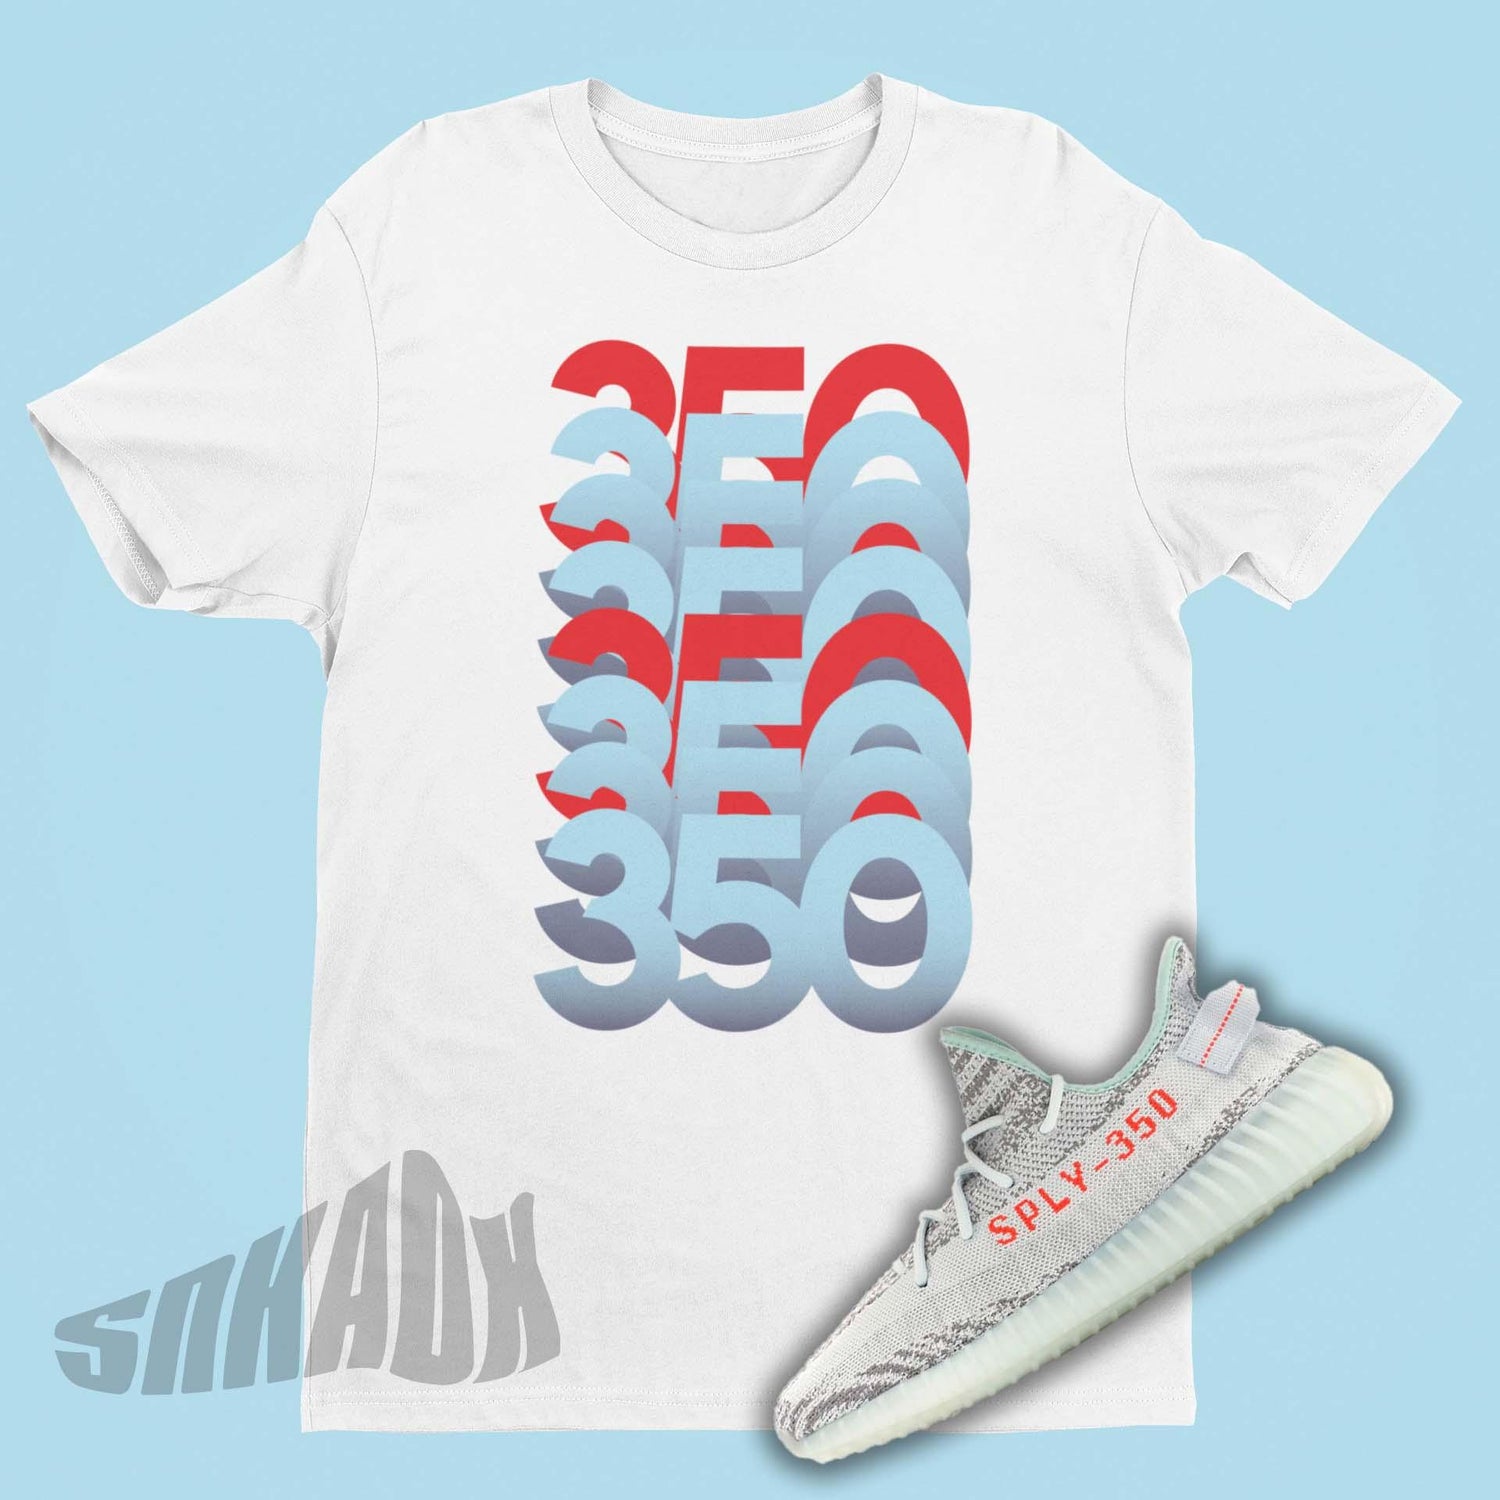 350 Stack Design Tshirt To Match Yeezy 350 Boost V2 Blue Tint